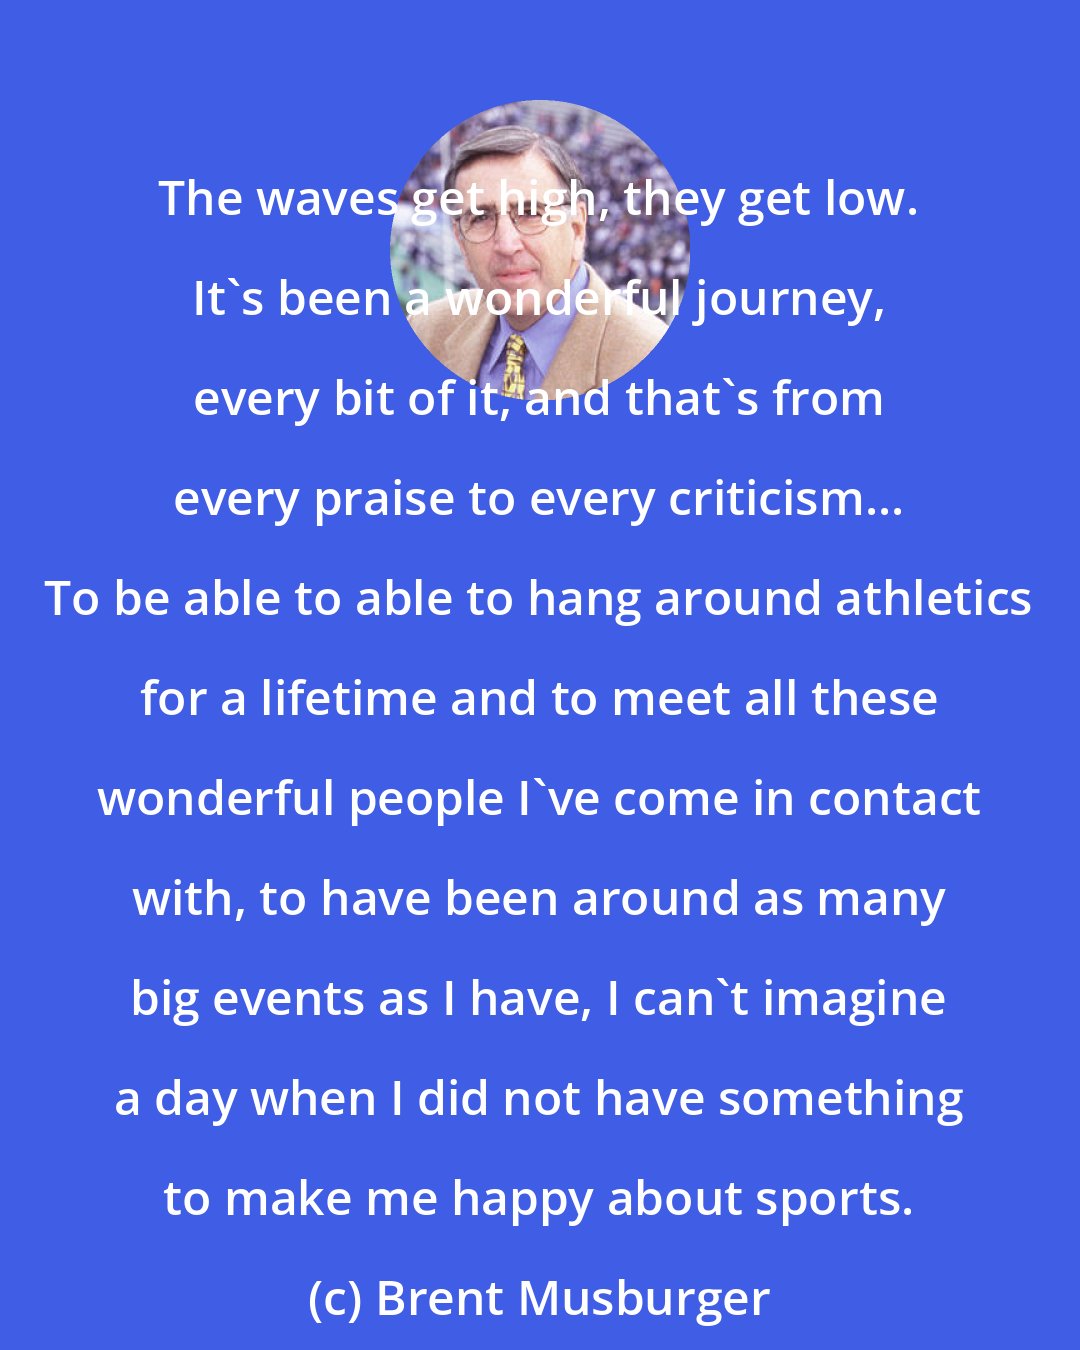 Brent Musburger: The waves get high, they get low. It's been a wonderful journey, every bit of it, and that's from every praise to every criticism... To be able to able to hang around athletics for a lifetime and to meet all these wonderful people I've come in contact with, to have been around as many big events as I have, I can't imagine a day when I did not have something to make me happy about sports.